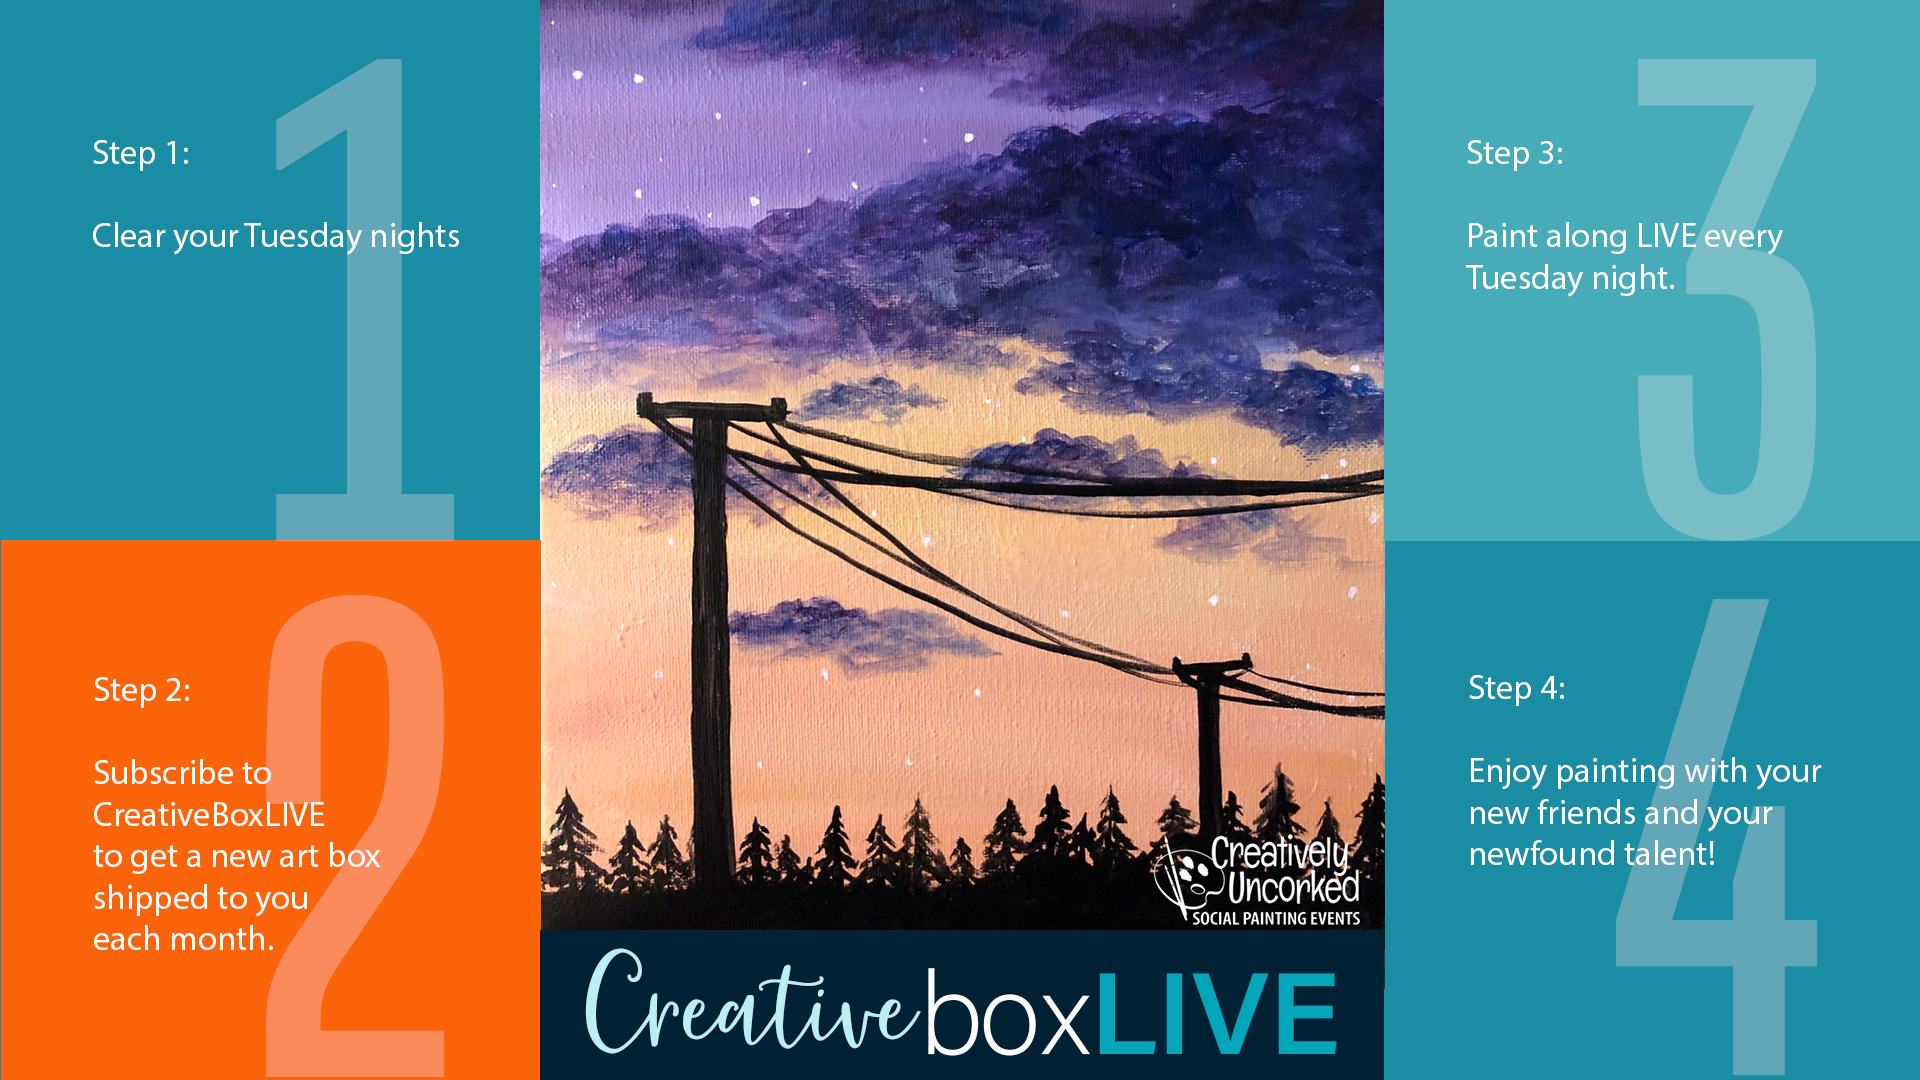 Sunset Wire CBL with CreativeBoxLIVE from Creatively Uncorked http://creativelyuncorked.com/